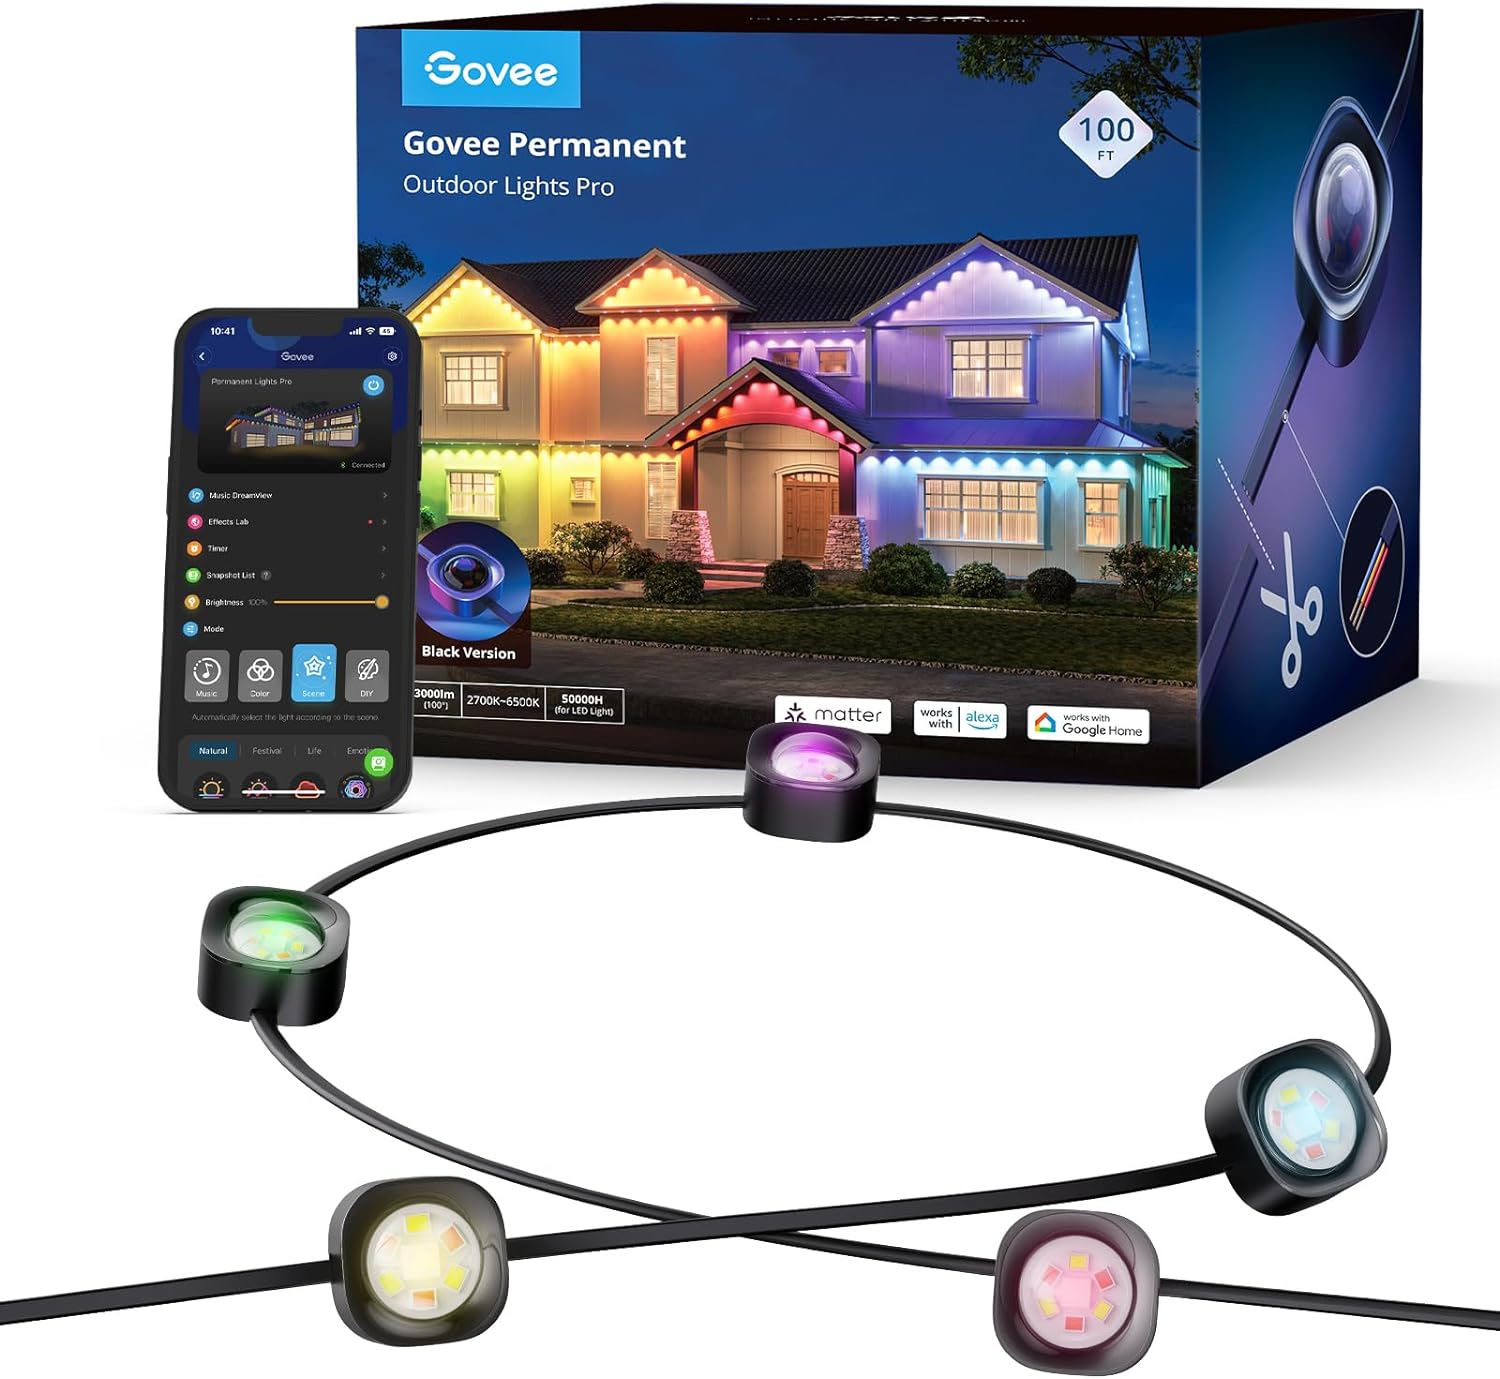 Govee Permanent Outdoor Lights Pro, 100ft with 60 RGBIC LED Lights for Daily and Accent Lighting, 75 Scene Modes, IP67 Waterproof, Works with Alexa, Google Assistant, Matter, Black Version